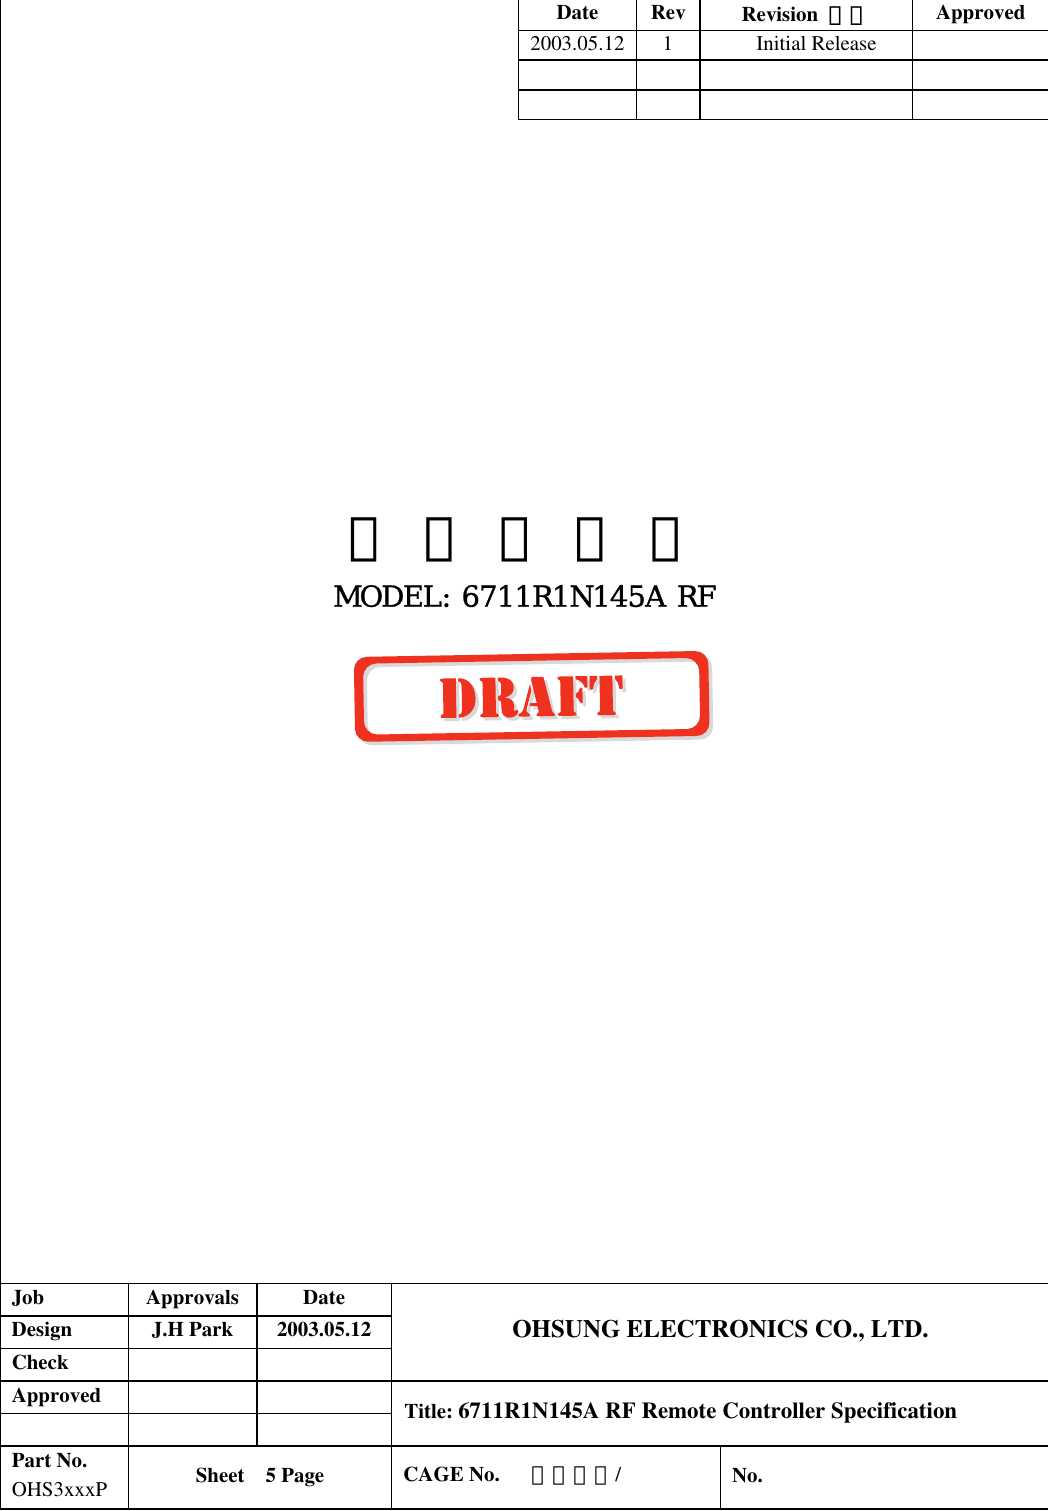 Date Rev  Revision  내용  Approved 2003.05.12 1  Initial Release                                                          사 양 설 명 서 MODEL: 6711R1N145A RF                    Job  Approvals  Date  Design  J.H Park  2003.05.12  Check    OHSUNG ELECTRONICS CO., LTD.  Approved         Title: 6711R1N145A RF Remote Controller Specification  Part No.  OHS3xxxP  Sheet  5 Page   CAGE No.   사양대장/   No. 